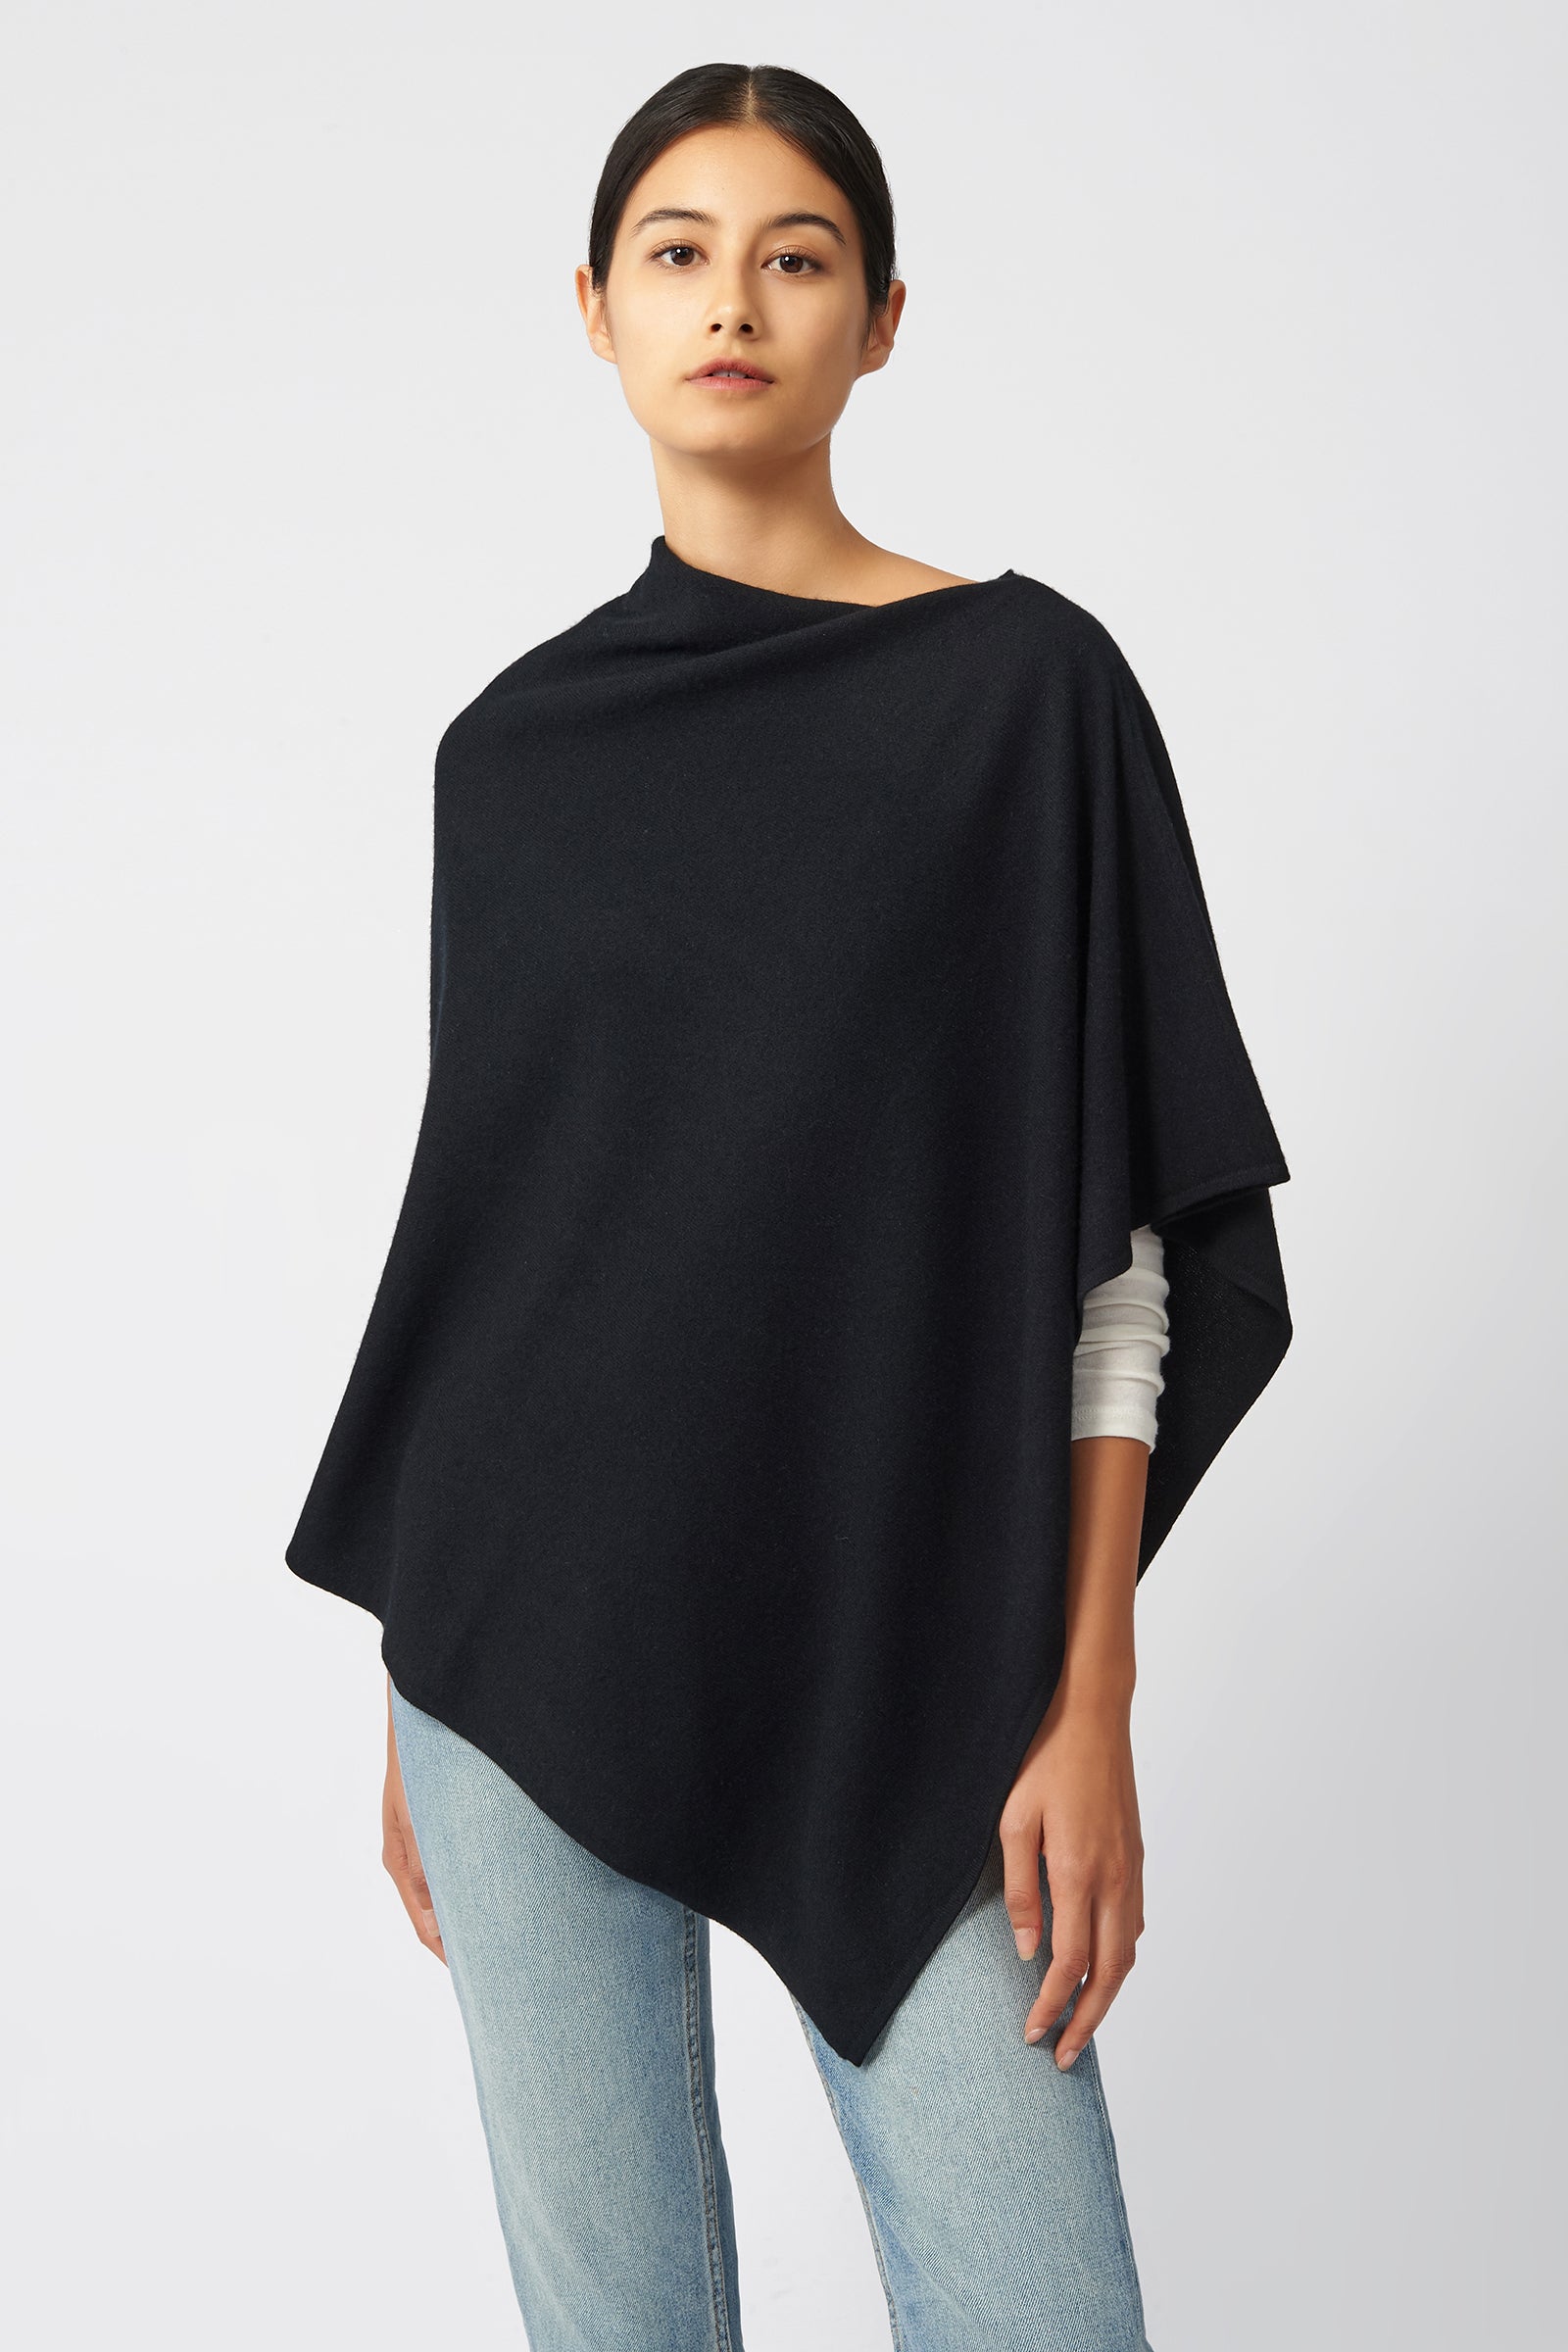 Kal Rieman Cashmere Poncho in Black on Model Front View